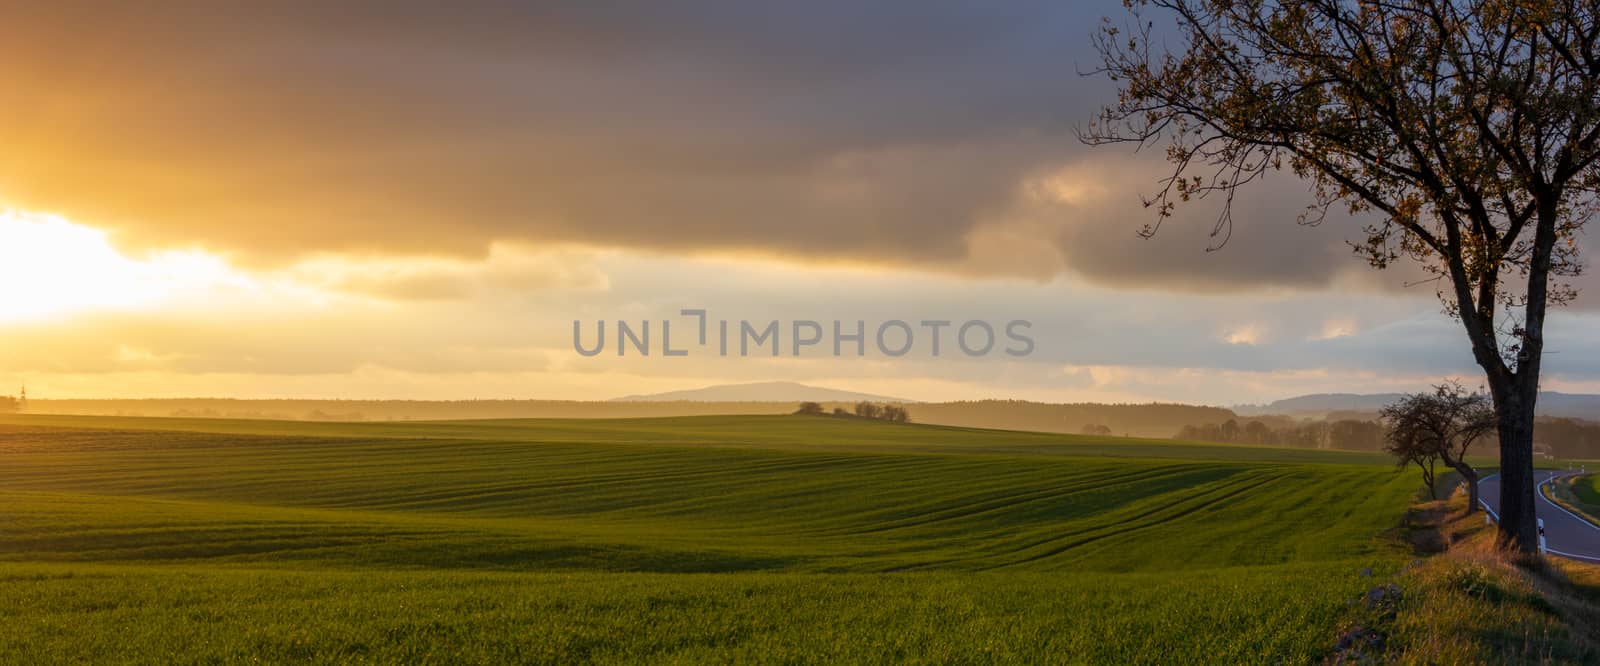 hazy rural evening landscape with golden light and group of trees in the distance. grey hills in the background and agricultural field in foreground